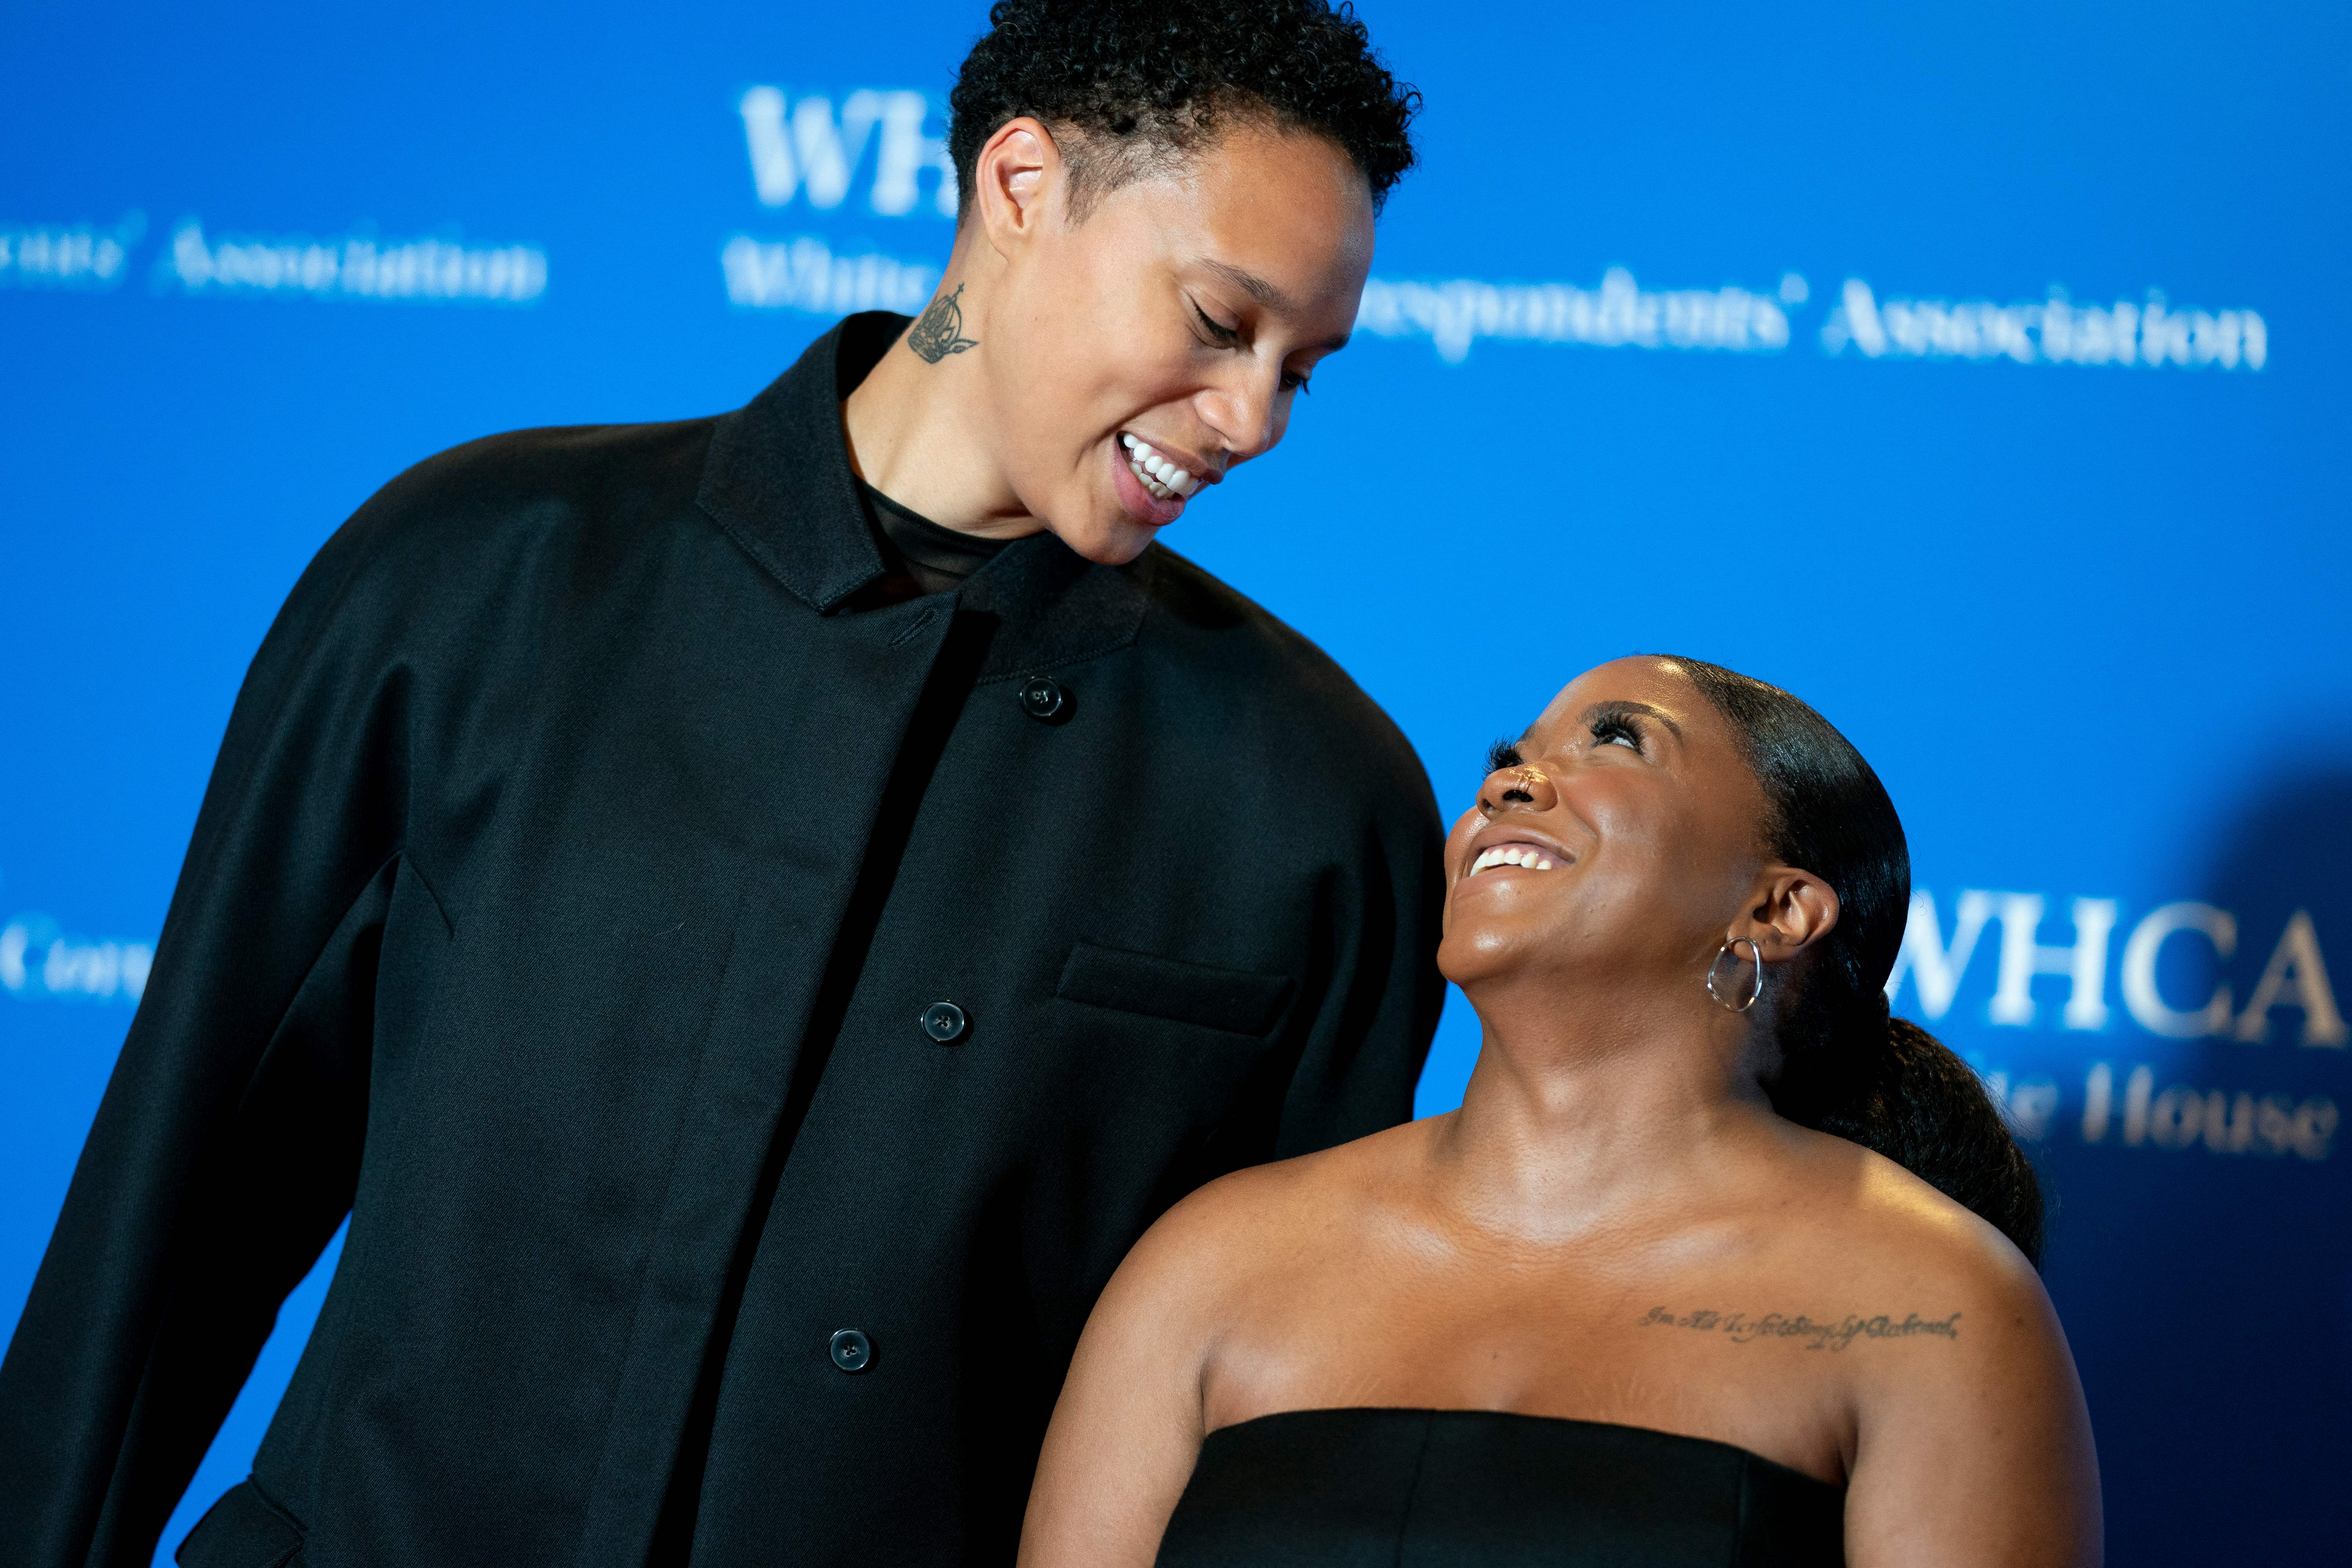 Brittney Griner and her spouse, Cherelle Griner, are pictured as they arrive for the White House Correspondents' Association dinner at the Washington Hilton on April 29, 2023, in Washington, DC | Source: Getty Images